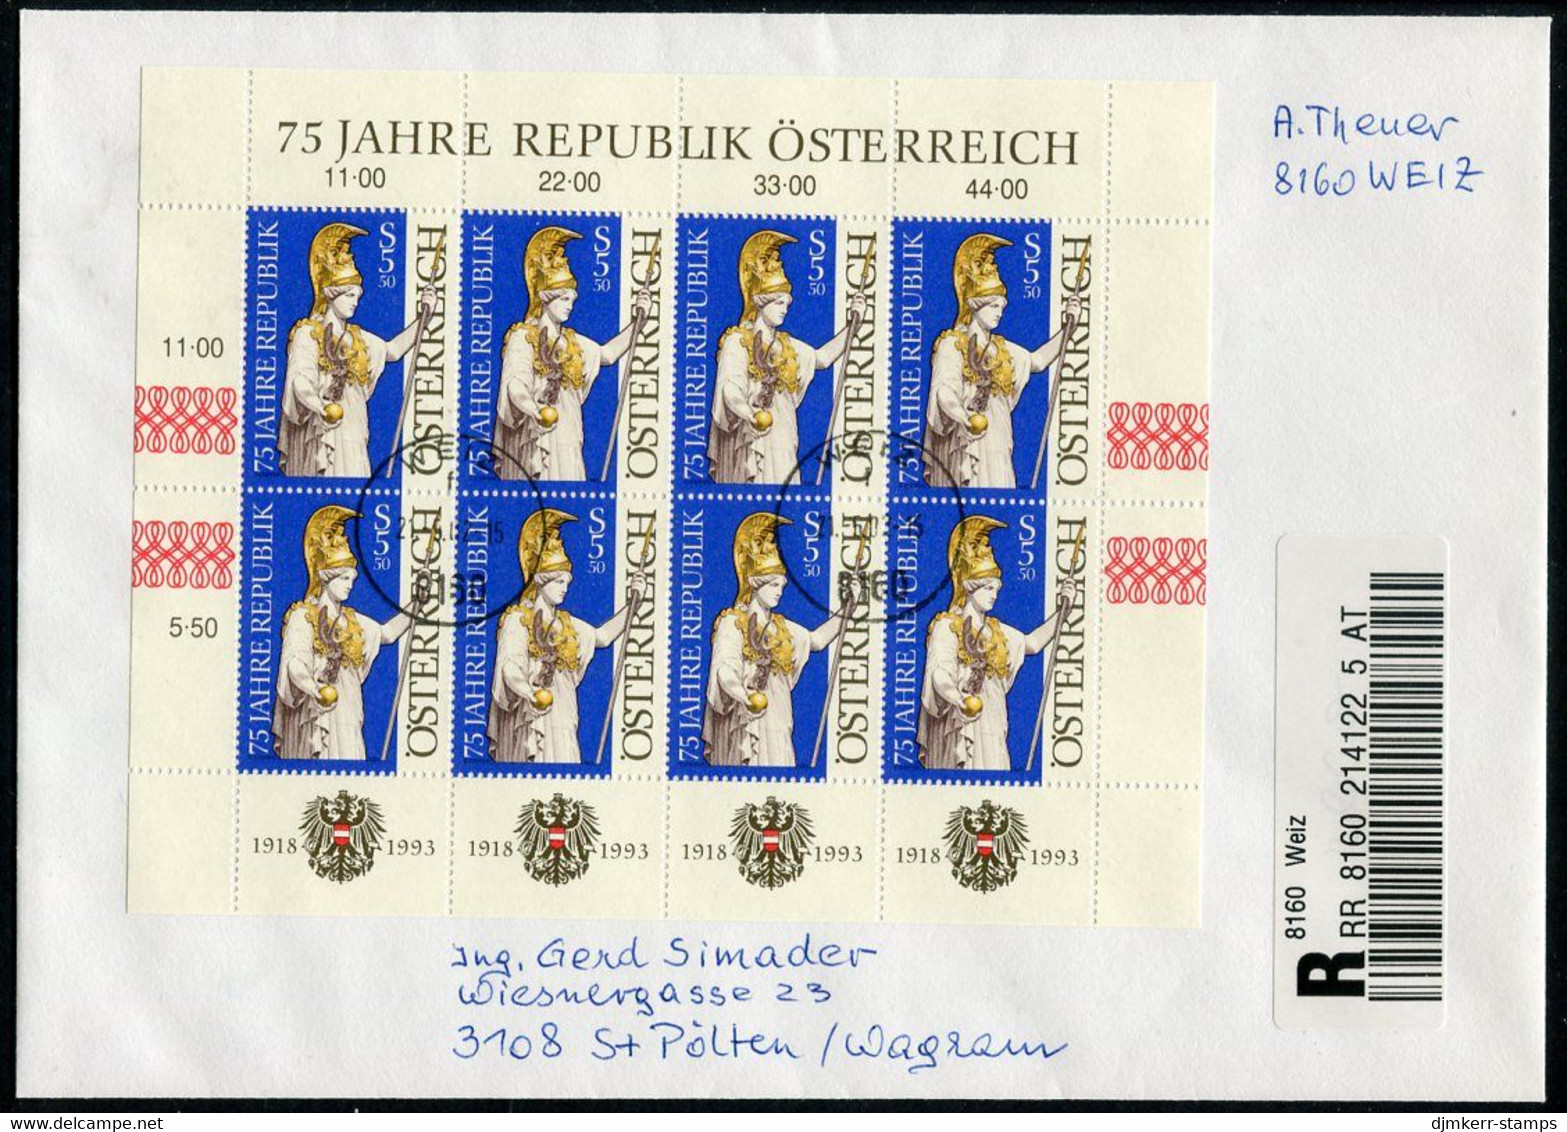 AUSTRIA 1993 Anniversary Of Republic Sheetlet, Postally Used On Registered Cover.  Michel 2113 Kb - Blocs & Feuillets